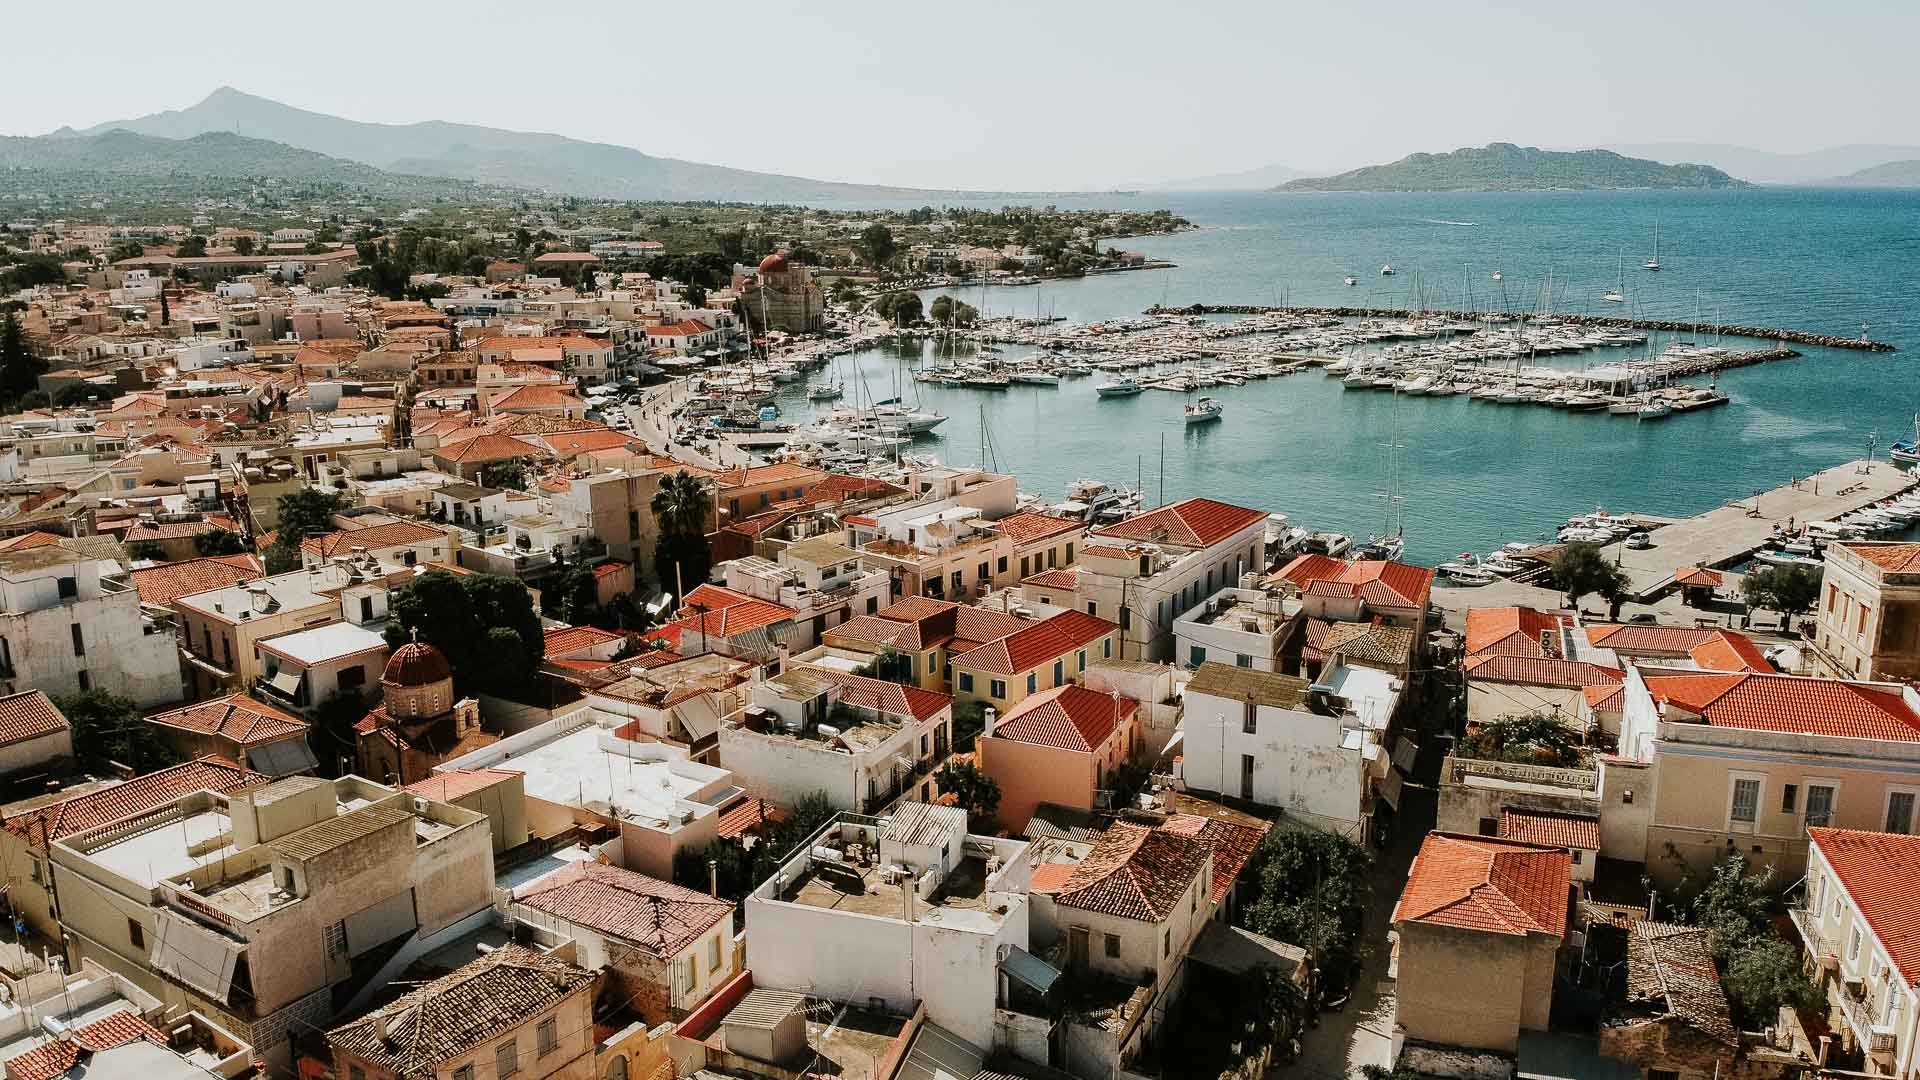 Aerial View of Port Aegina With Luxury Yachts and sailing boats parking on shore.Cityscape wide view over Aegina Island.